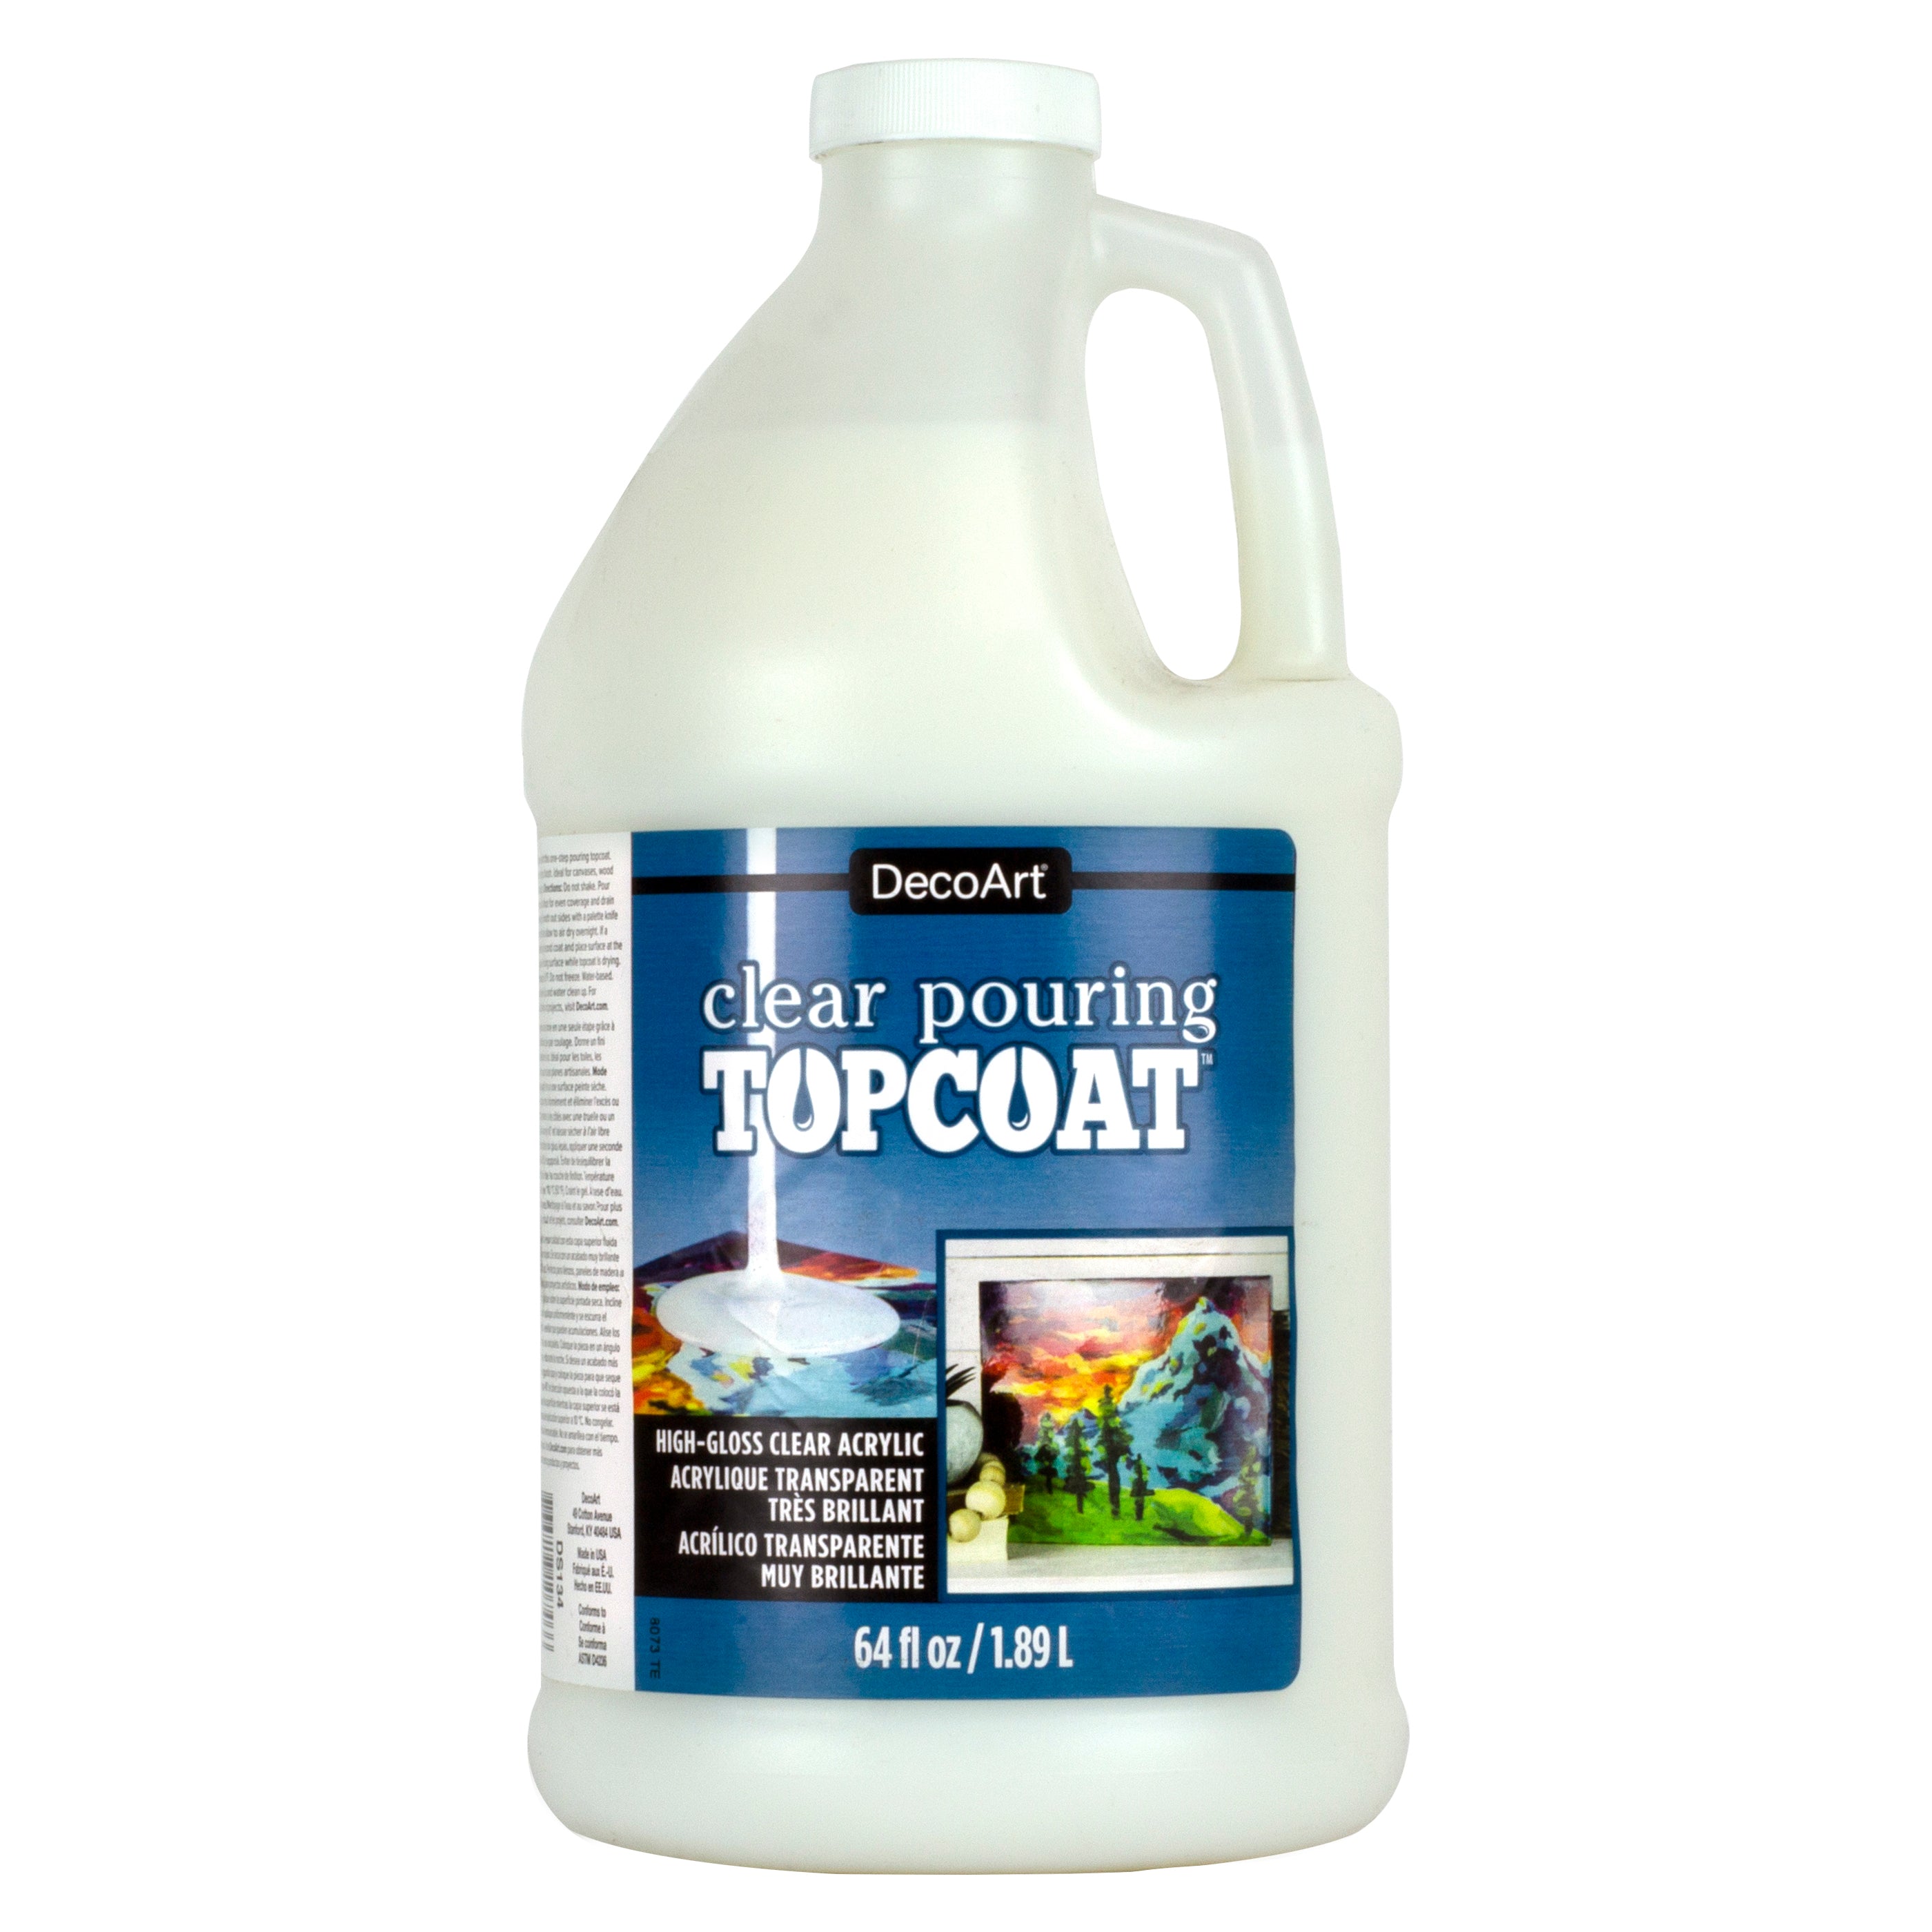 Decoart Clear Pouring Topcoat - 16 oz